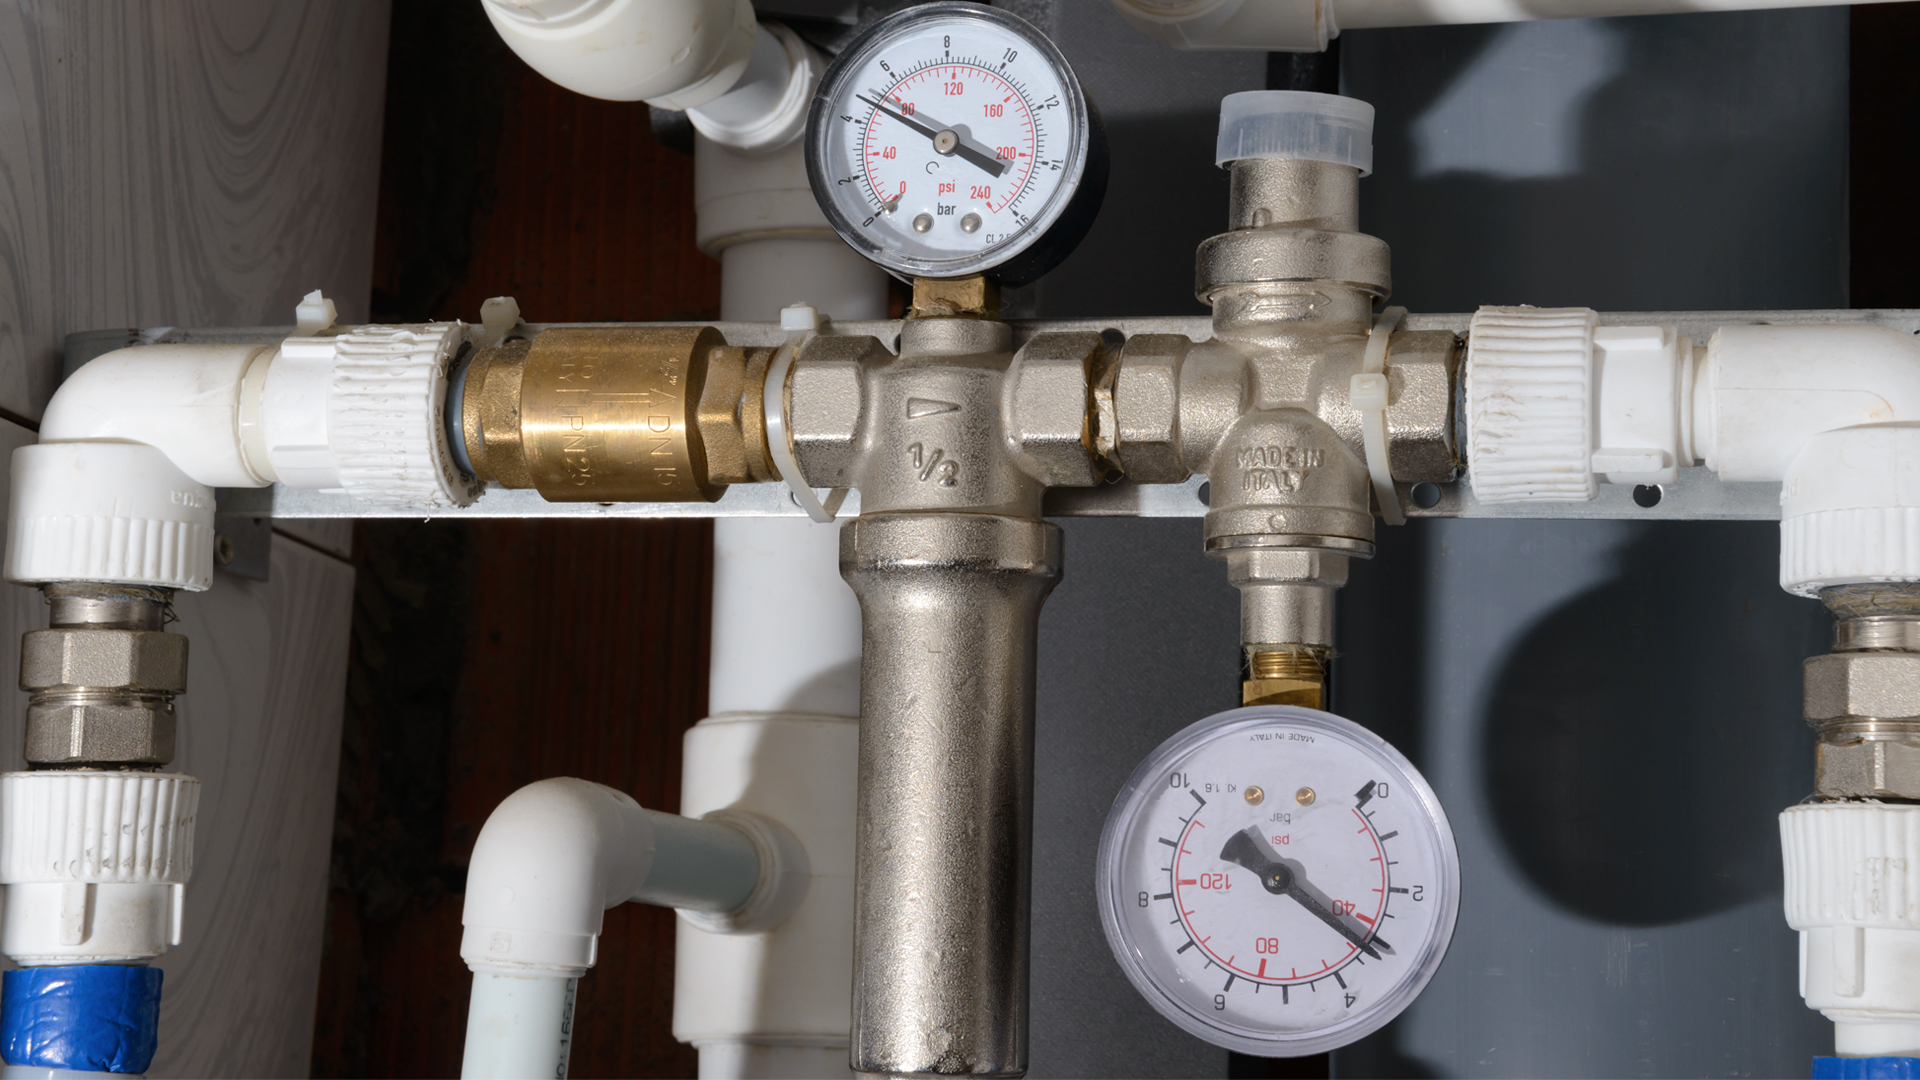 Industrial pipes with pressure gauges and check valves